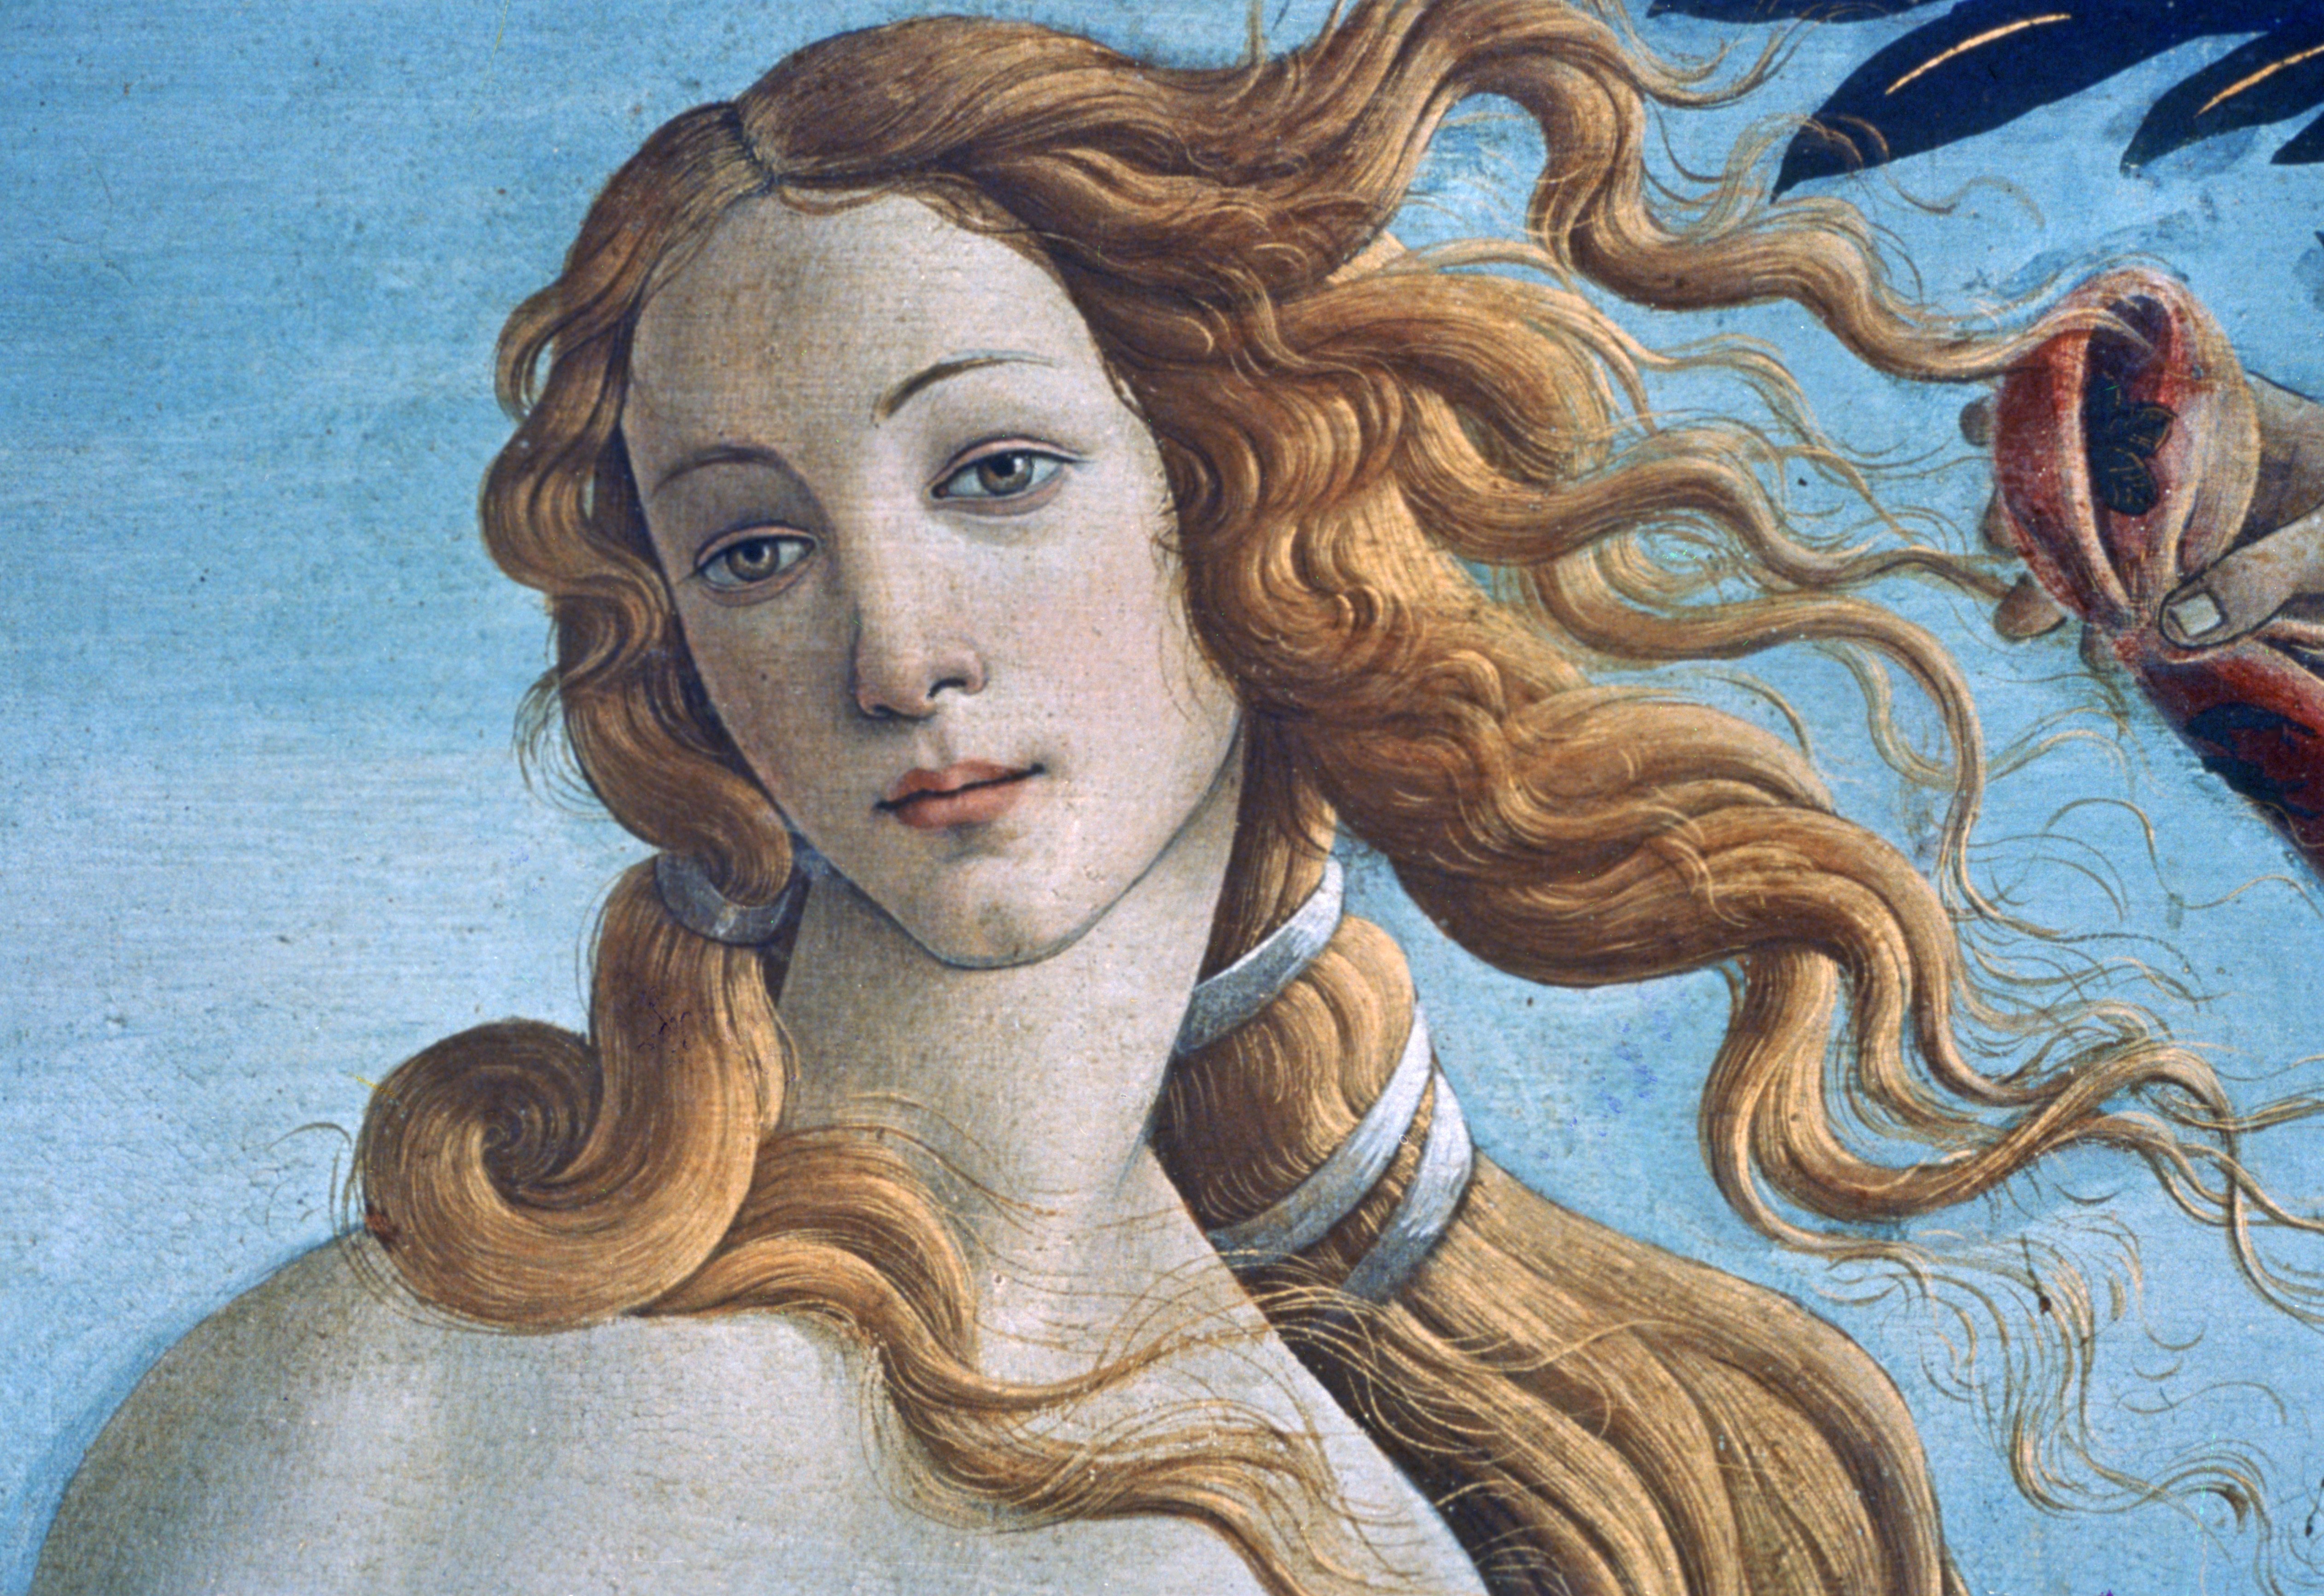 "The Birth of Venus" painting from the collection of the Galleria degli Uffizi, Florence, Italy. | Source: Getty Images